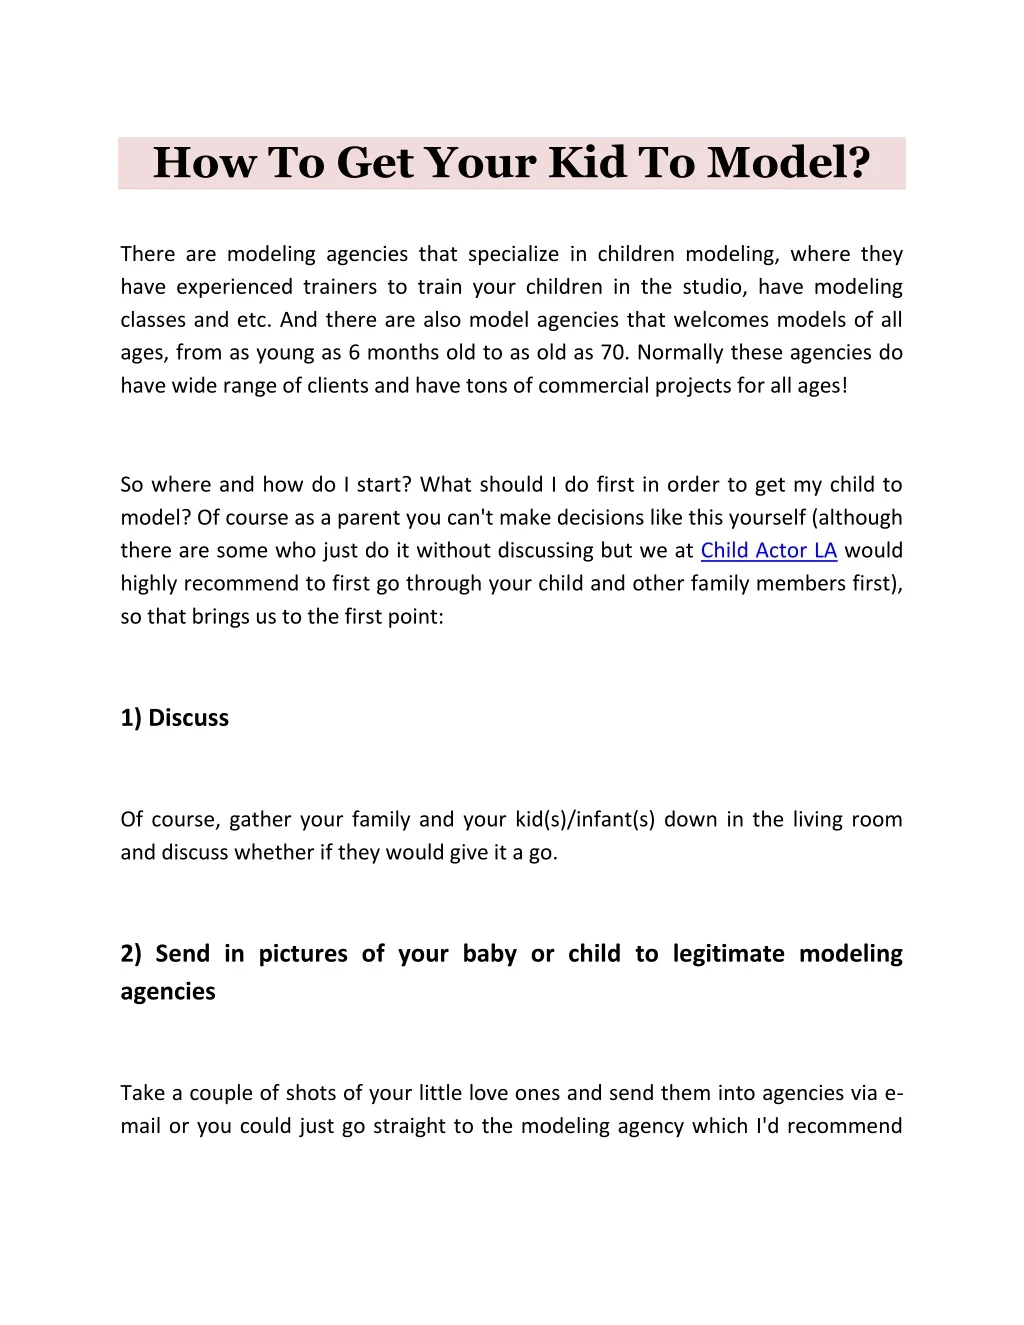 how to get your kid to model